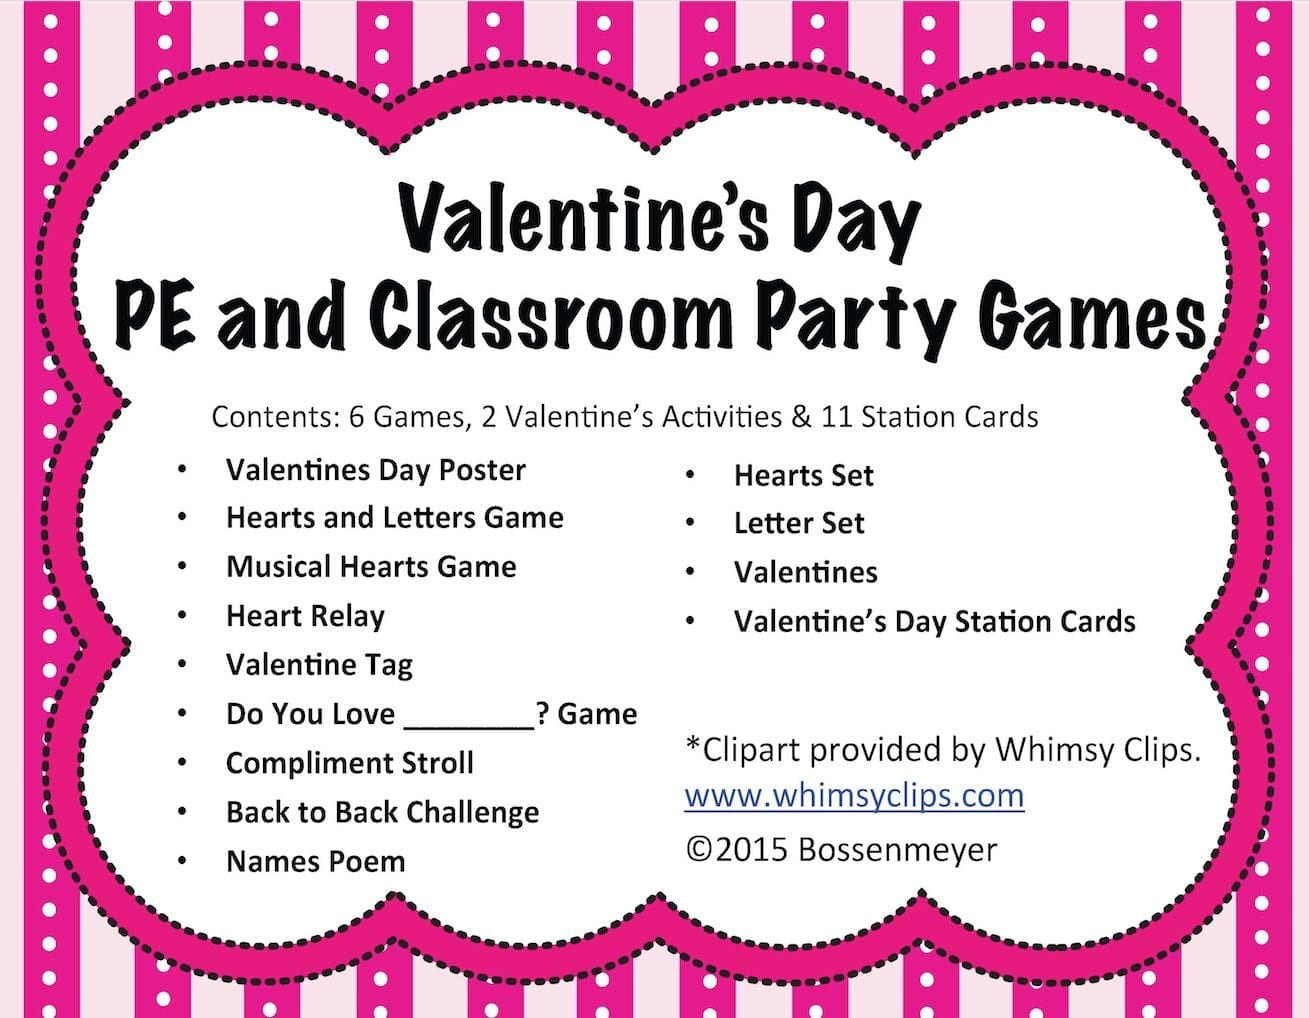 Valentines Day Party Names
 Classroom Party Games Valentine’s Day PE Peaceful